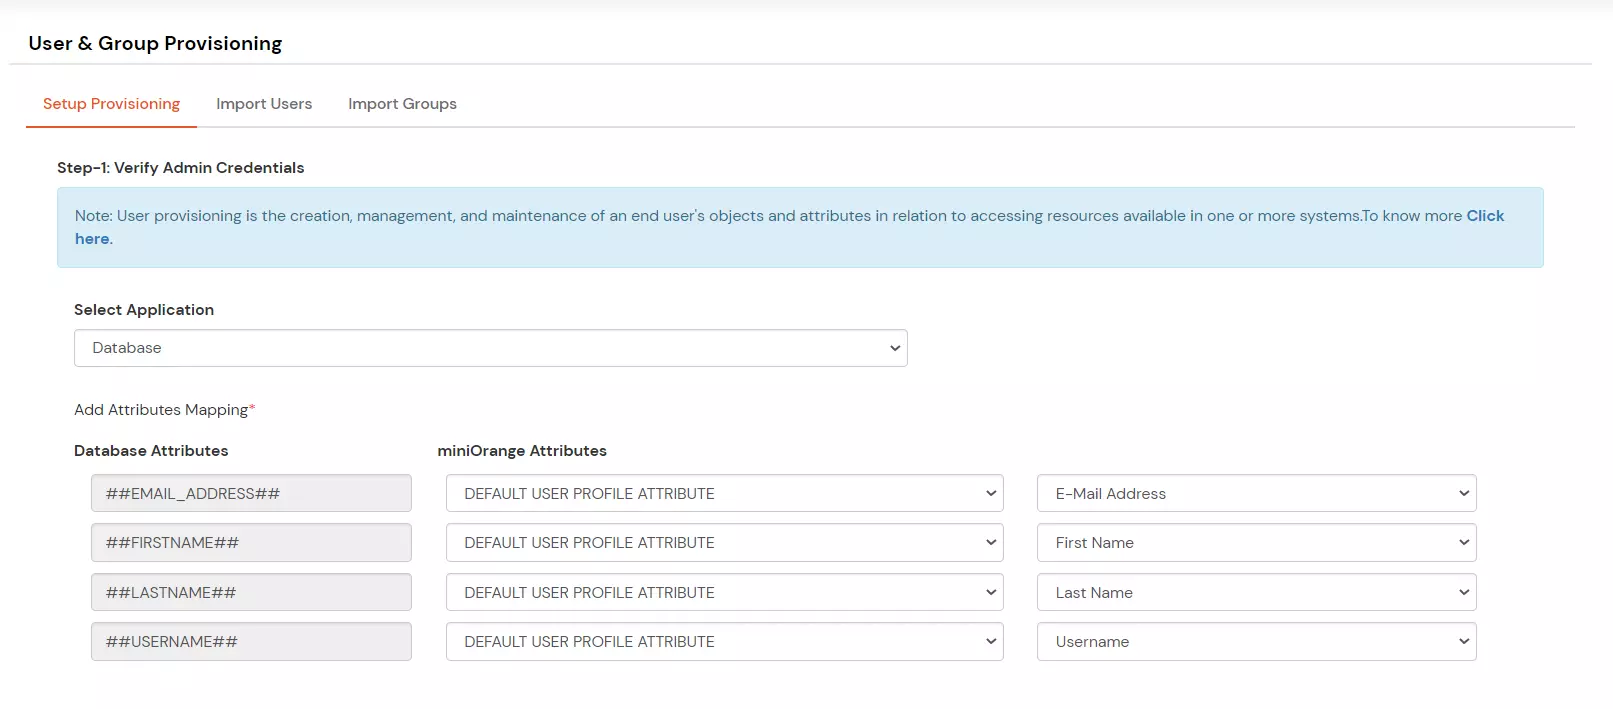 Configure Oracle Database Provisioning: Default User Profile Attributes mapping list